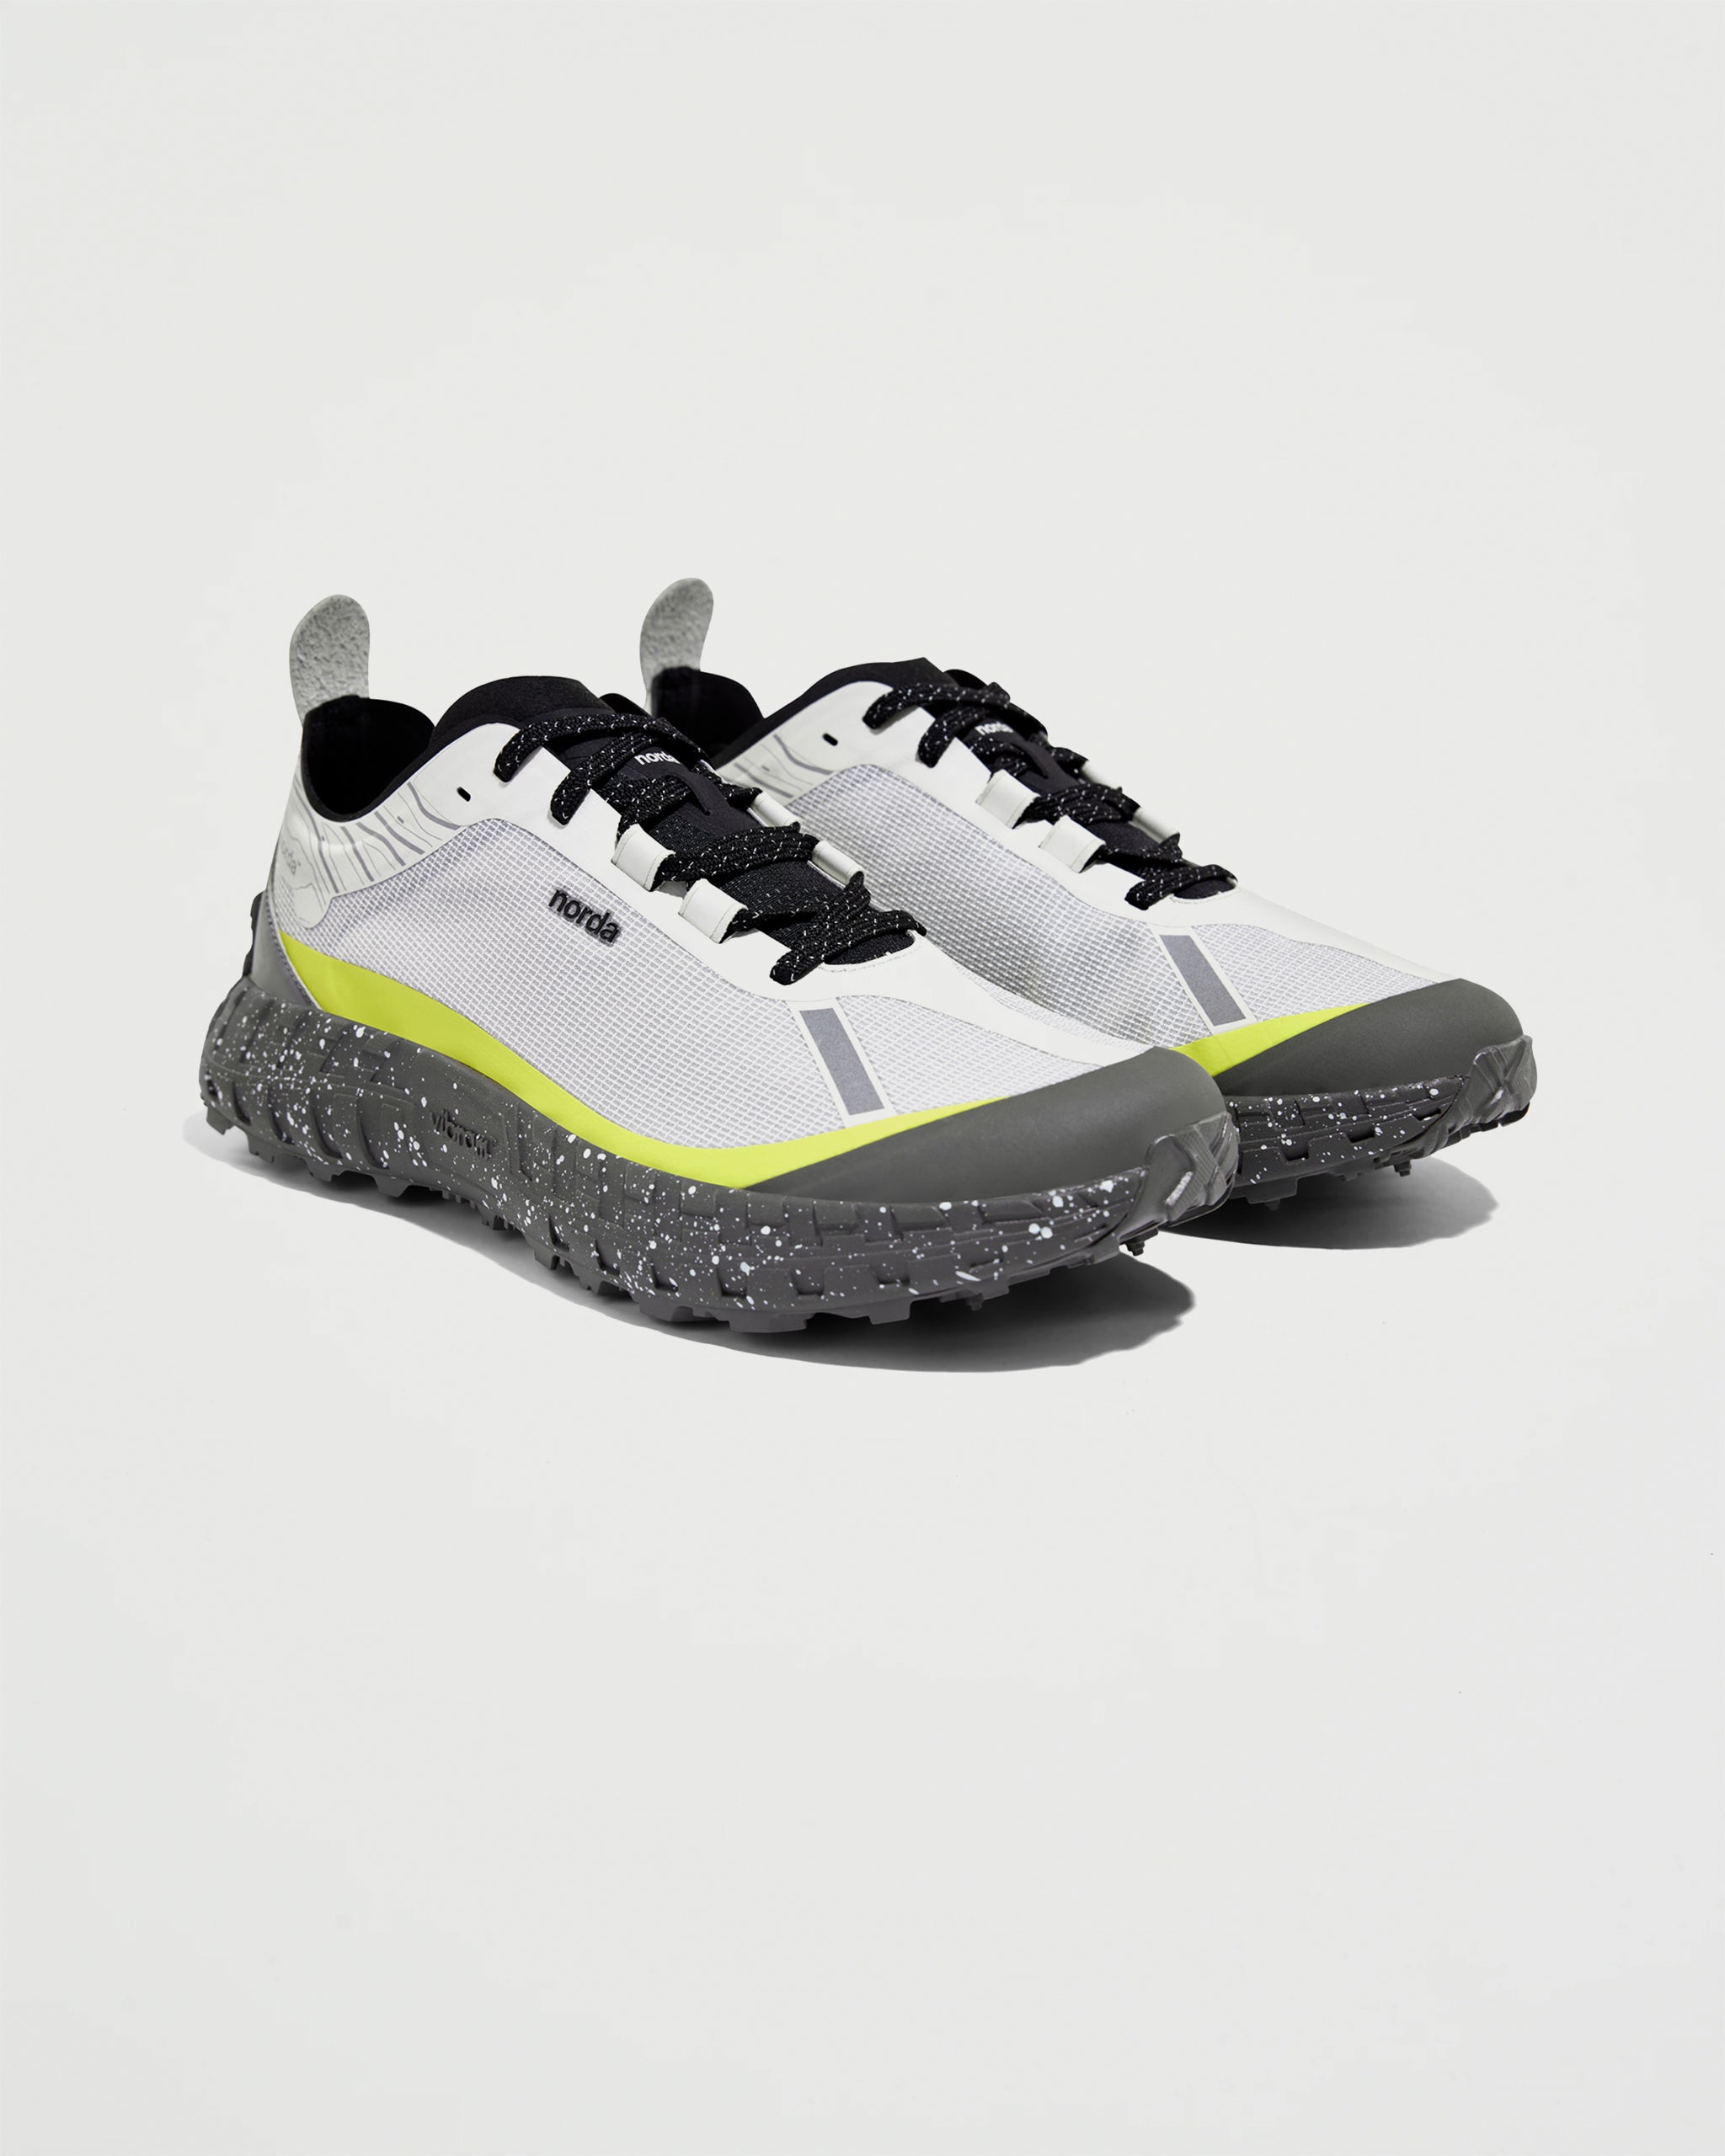 Norda Run 001 Limited Edition Icicle Shoes Sneakers Men